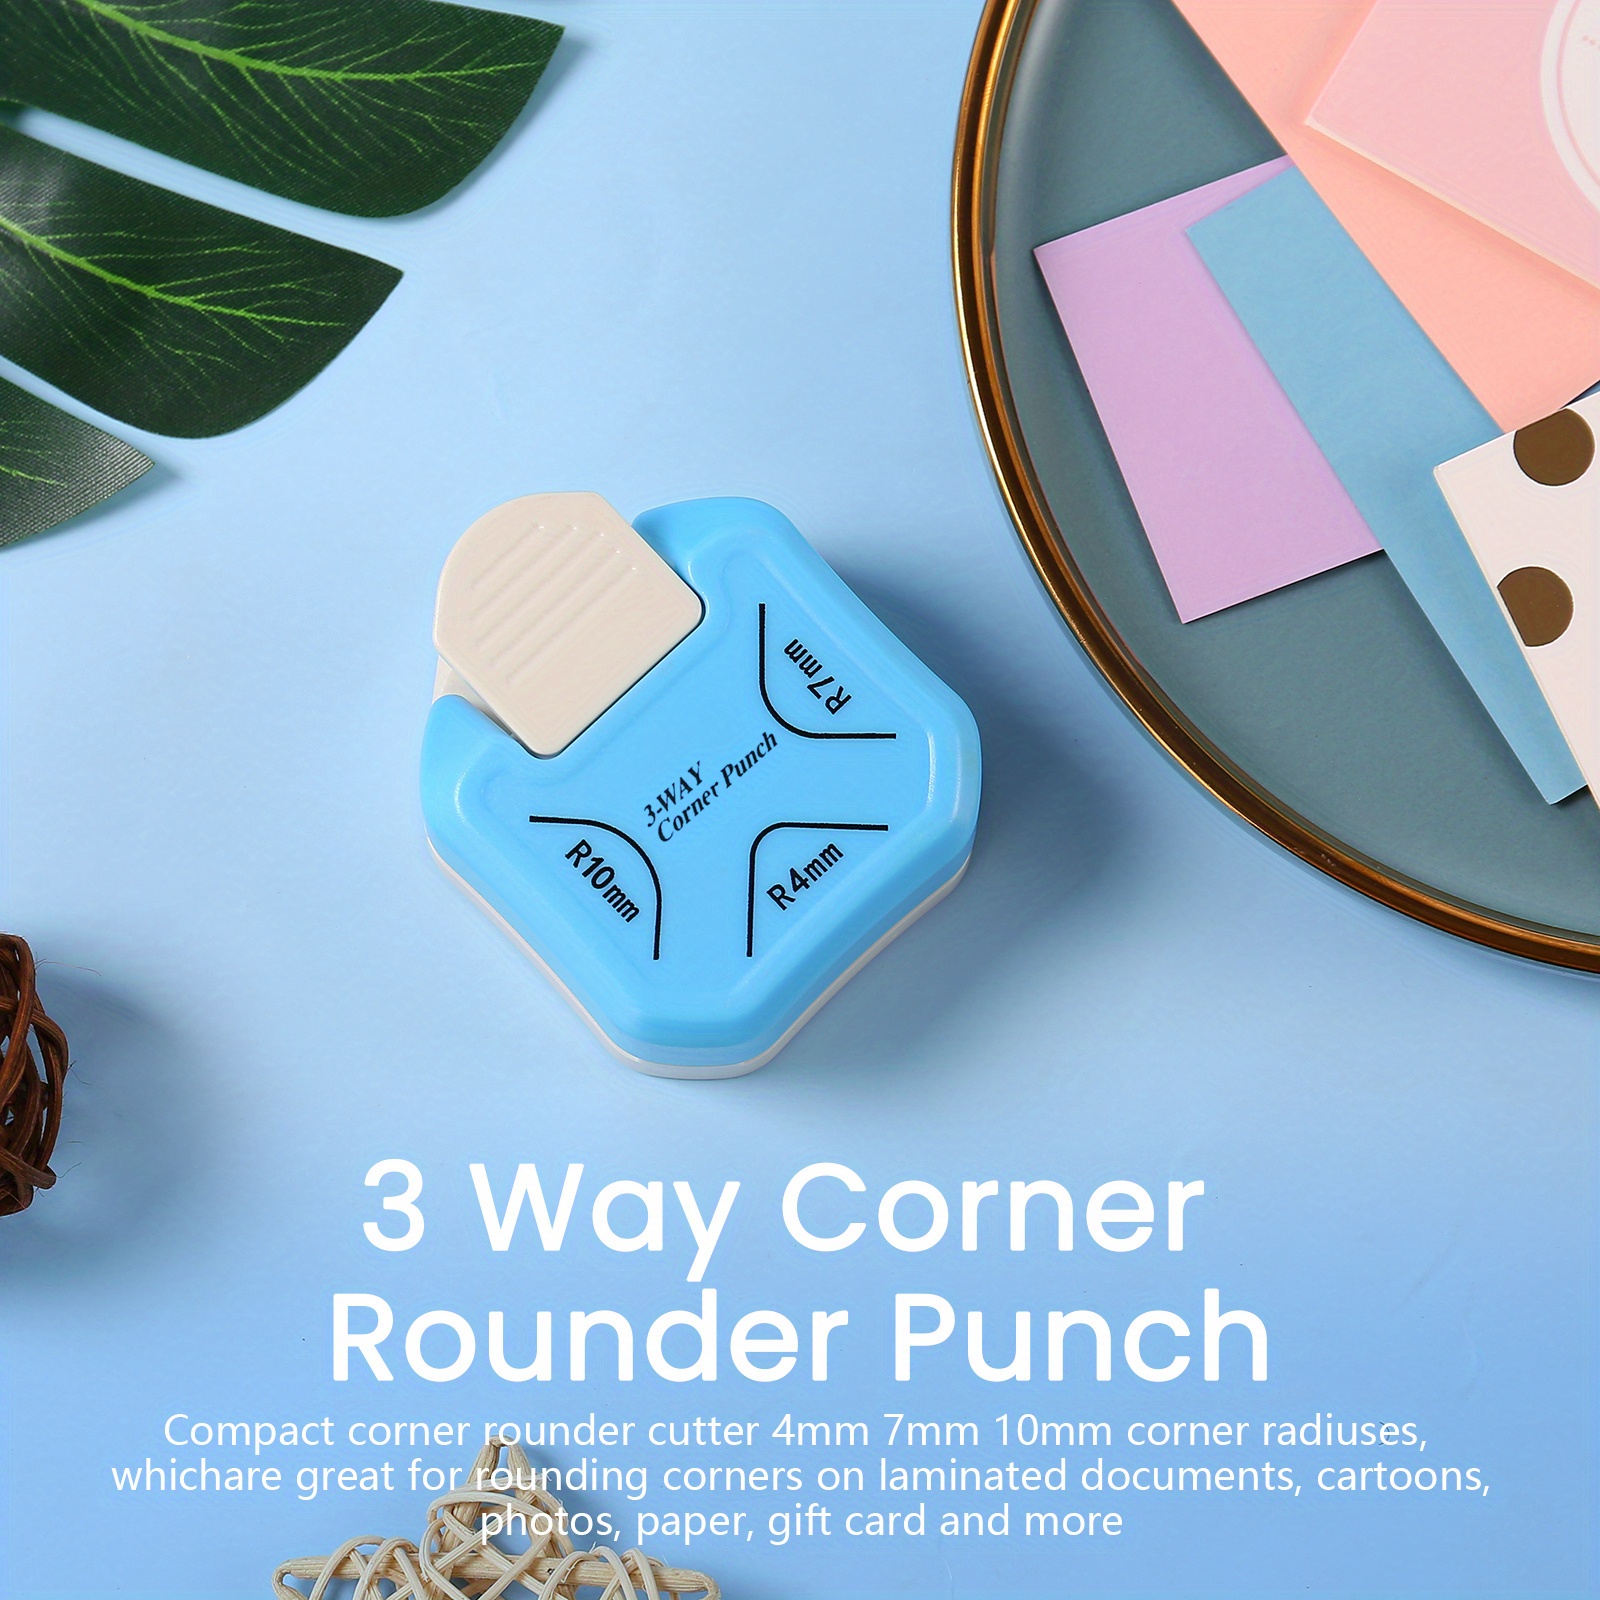 SHARME 3 Way Corner Rounder Punch, 4mm, 7mm, 10mm 3 in 1 Corner Cutter for  Paper Crafts, Cardstock, DIY Projects, Laminate, Photocards, Business Card,  Scrapbooking and Card Making